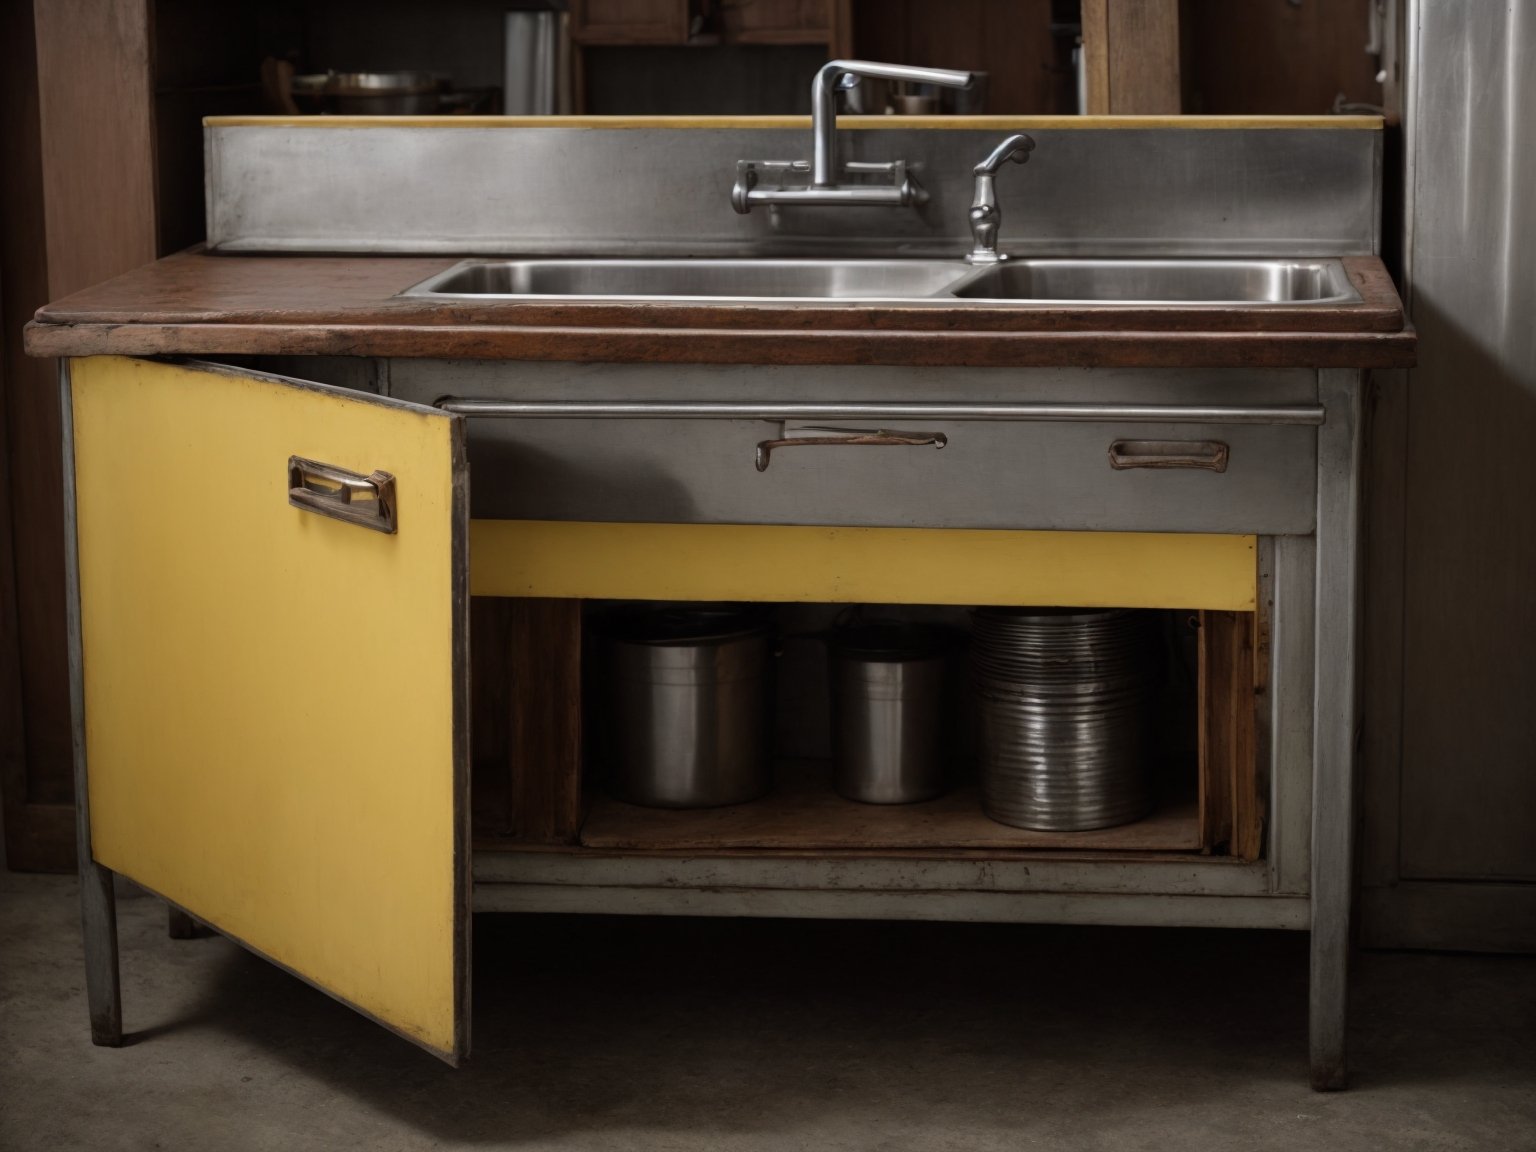 An antique metal kitchen sink cabinet available for purchase, showcasing its timeless appeal and practicality.